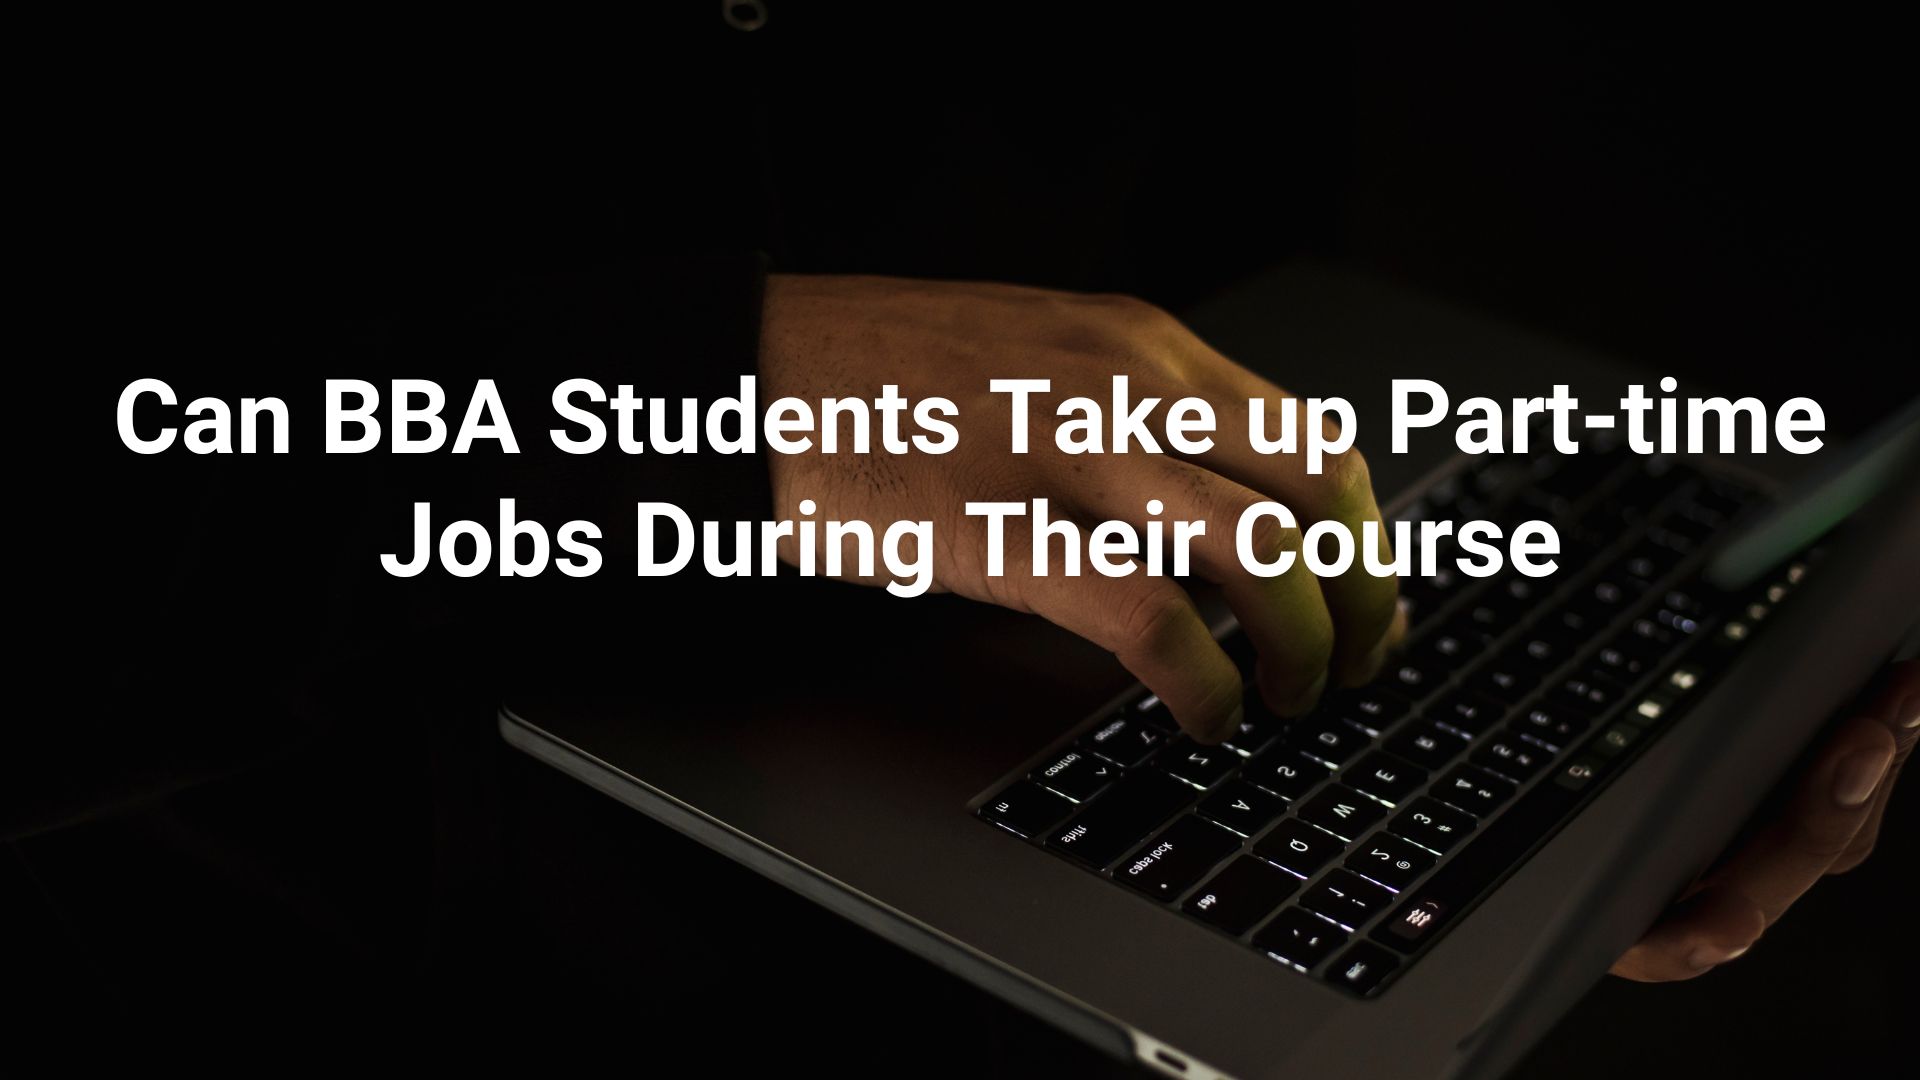 Can BBA students take up part-time jobs during their course